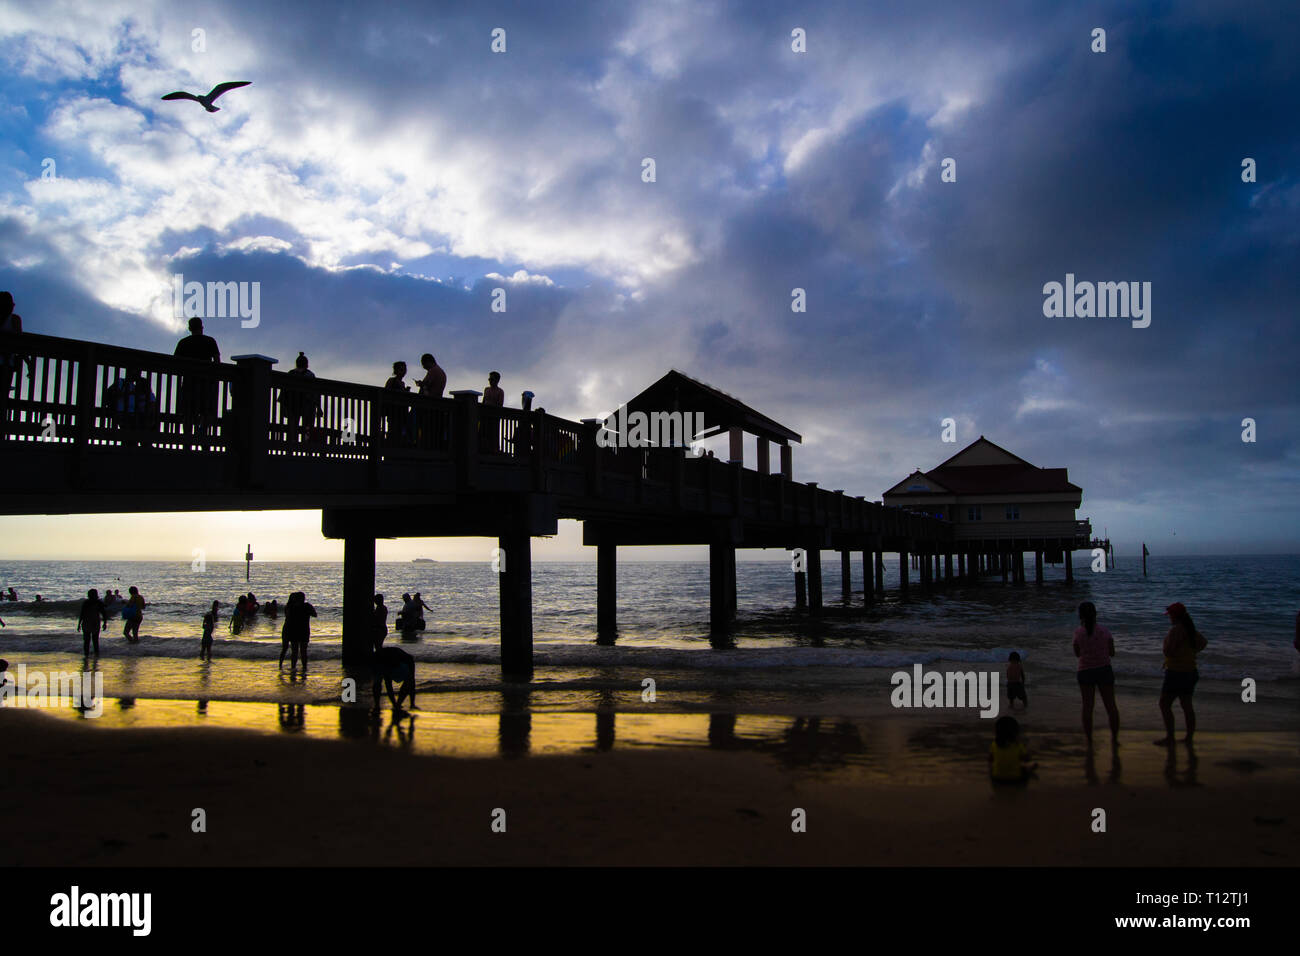 Night at a beach in Florida Stock Photo